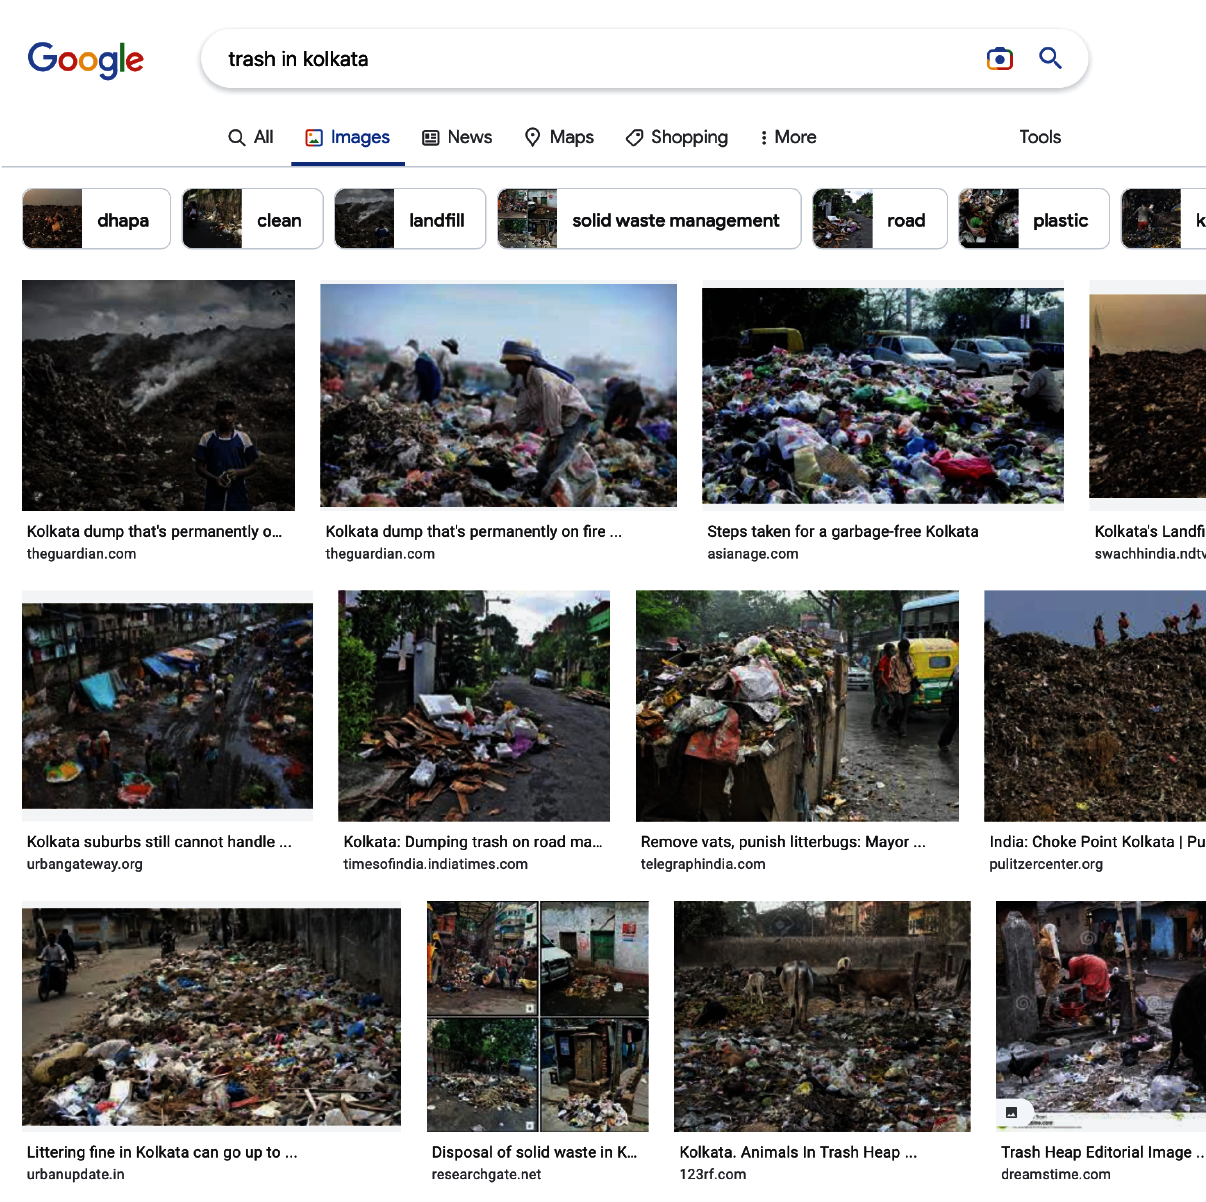 Google Search: “The Image of the Global South”, “trash mountains”.